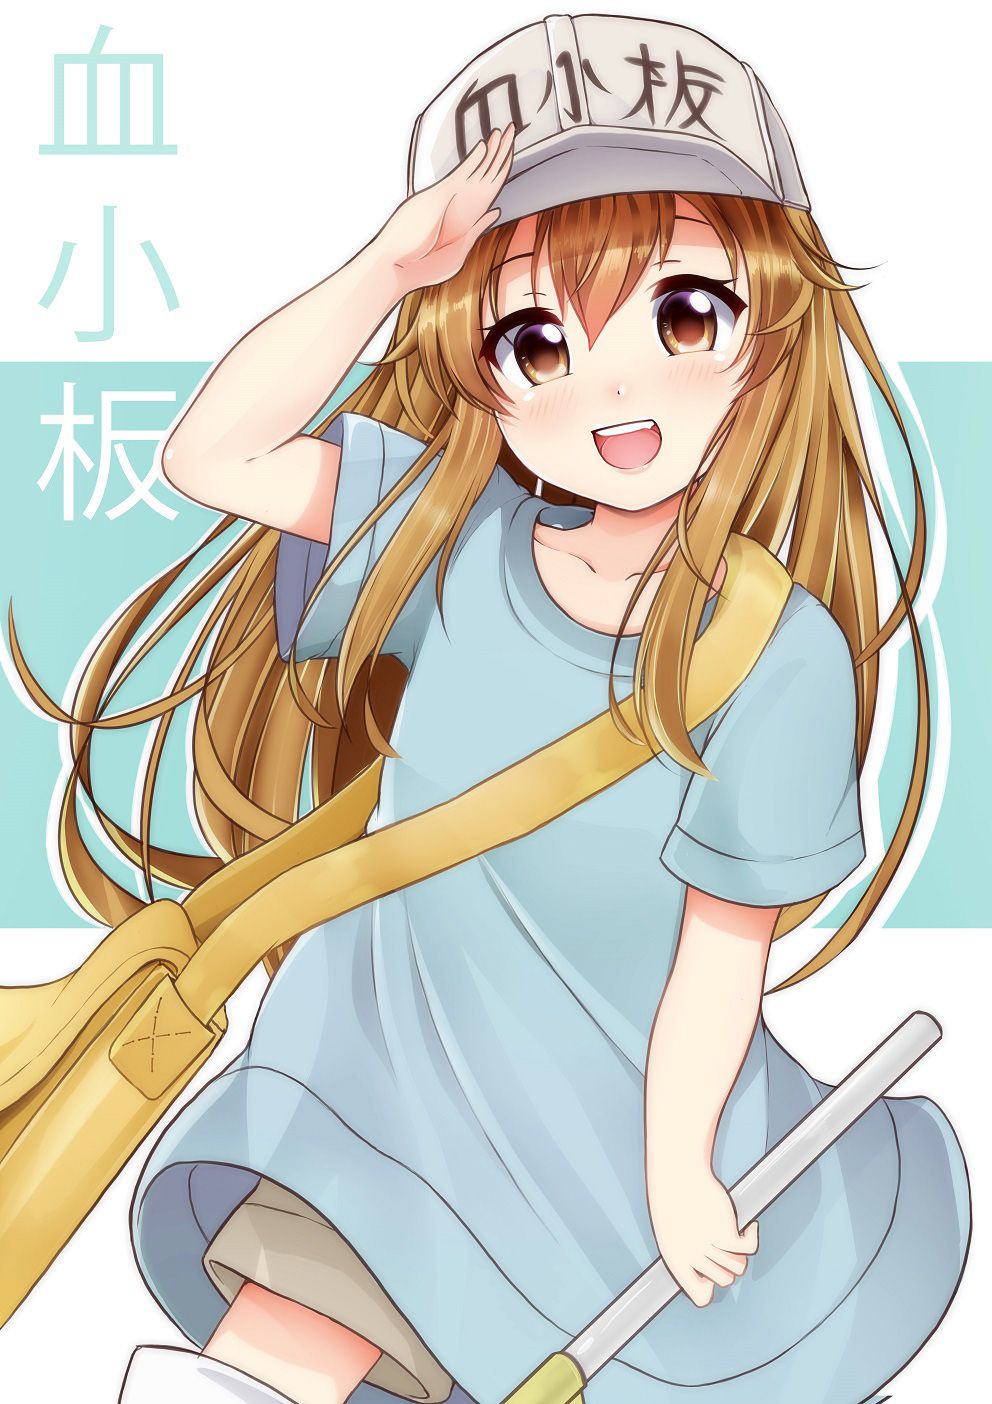 [Working cells] secondary images of platelets 1 60 sheets [ero/non-erotic] 18